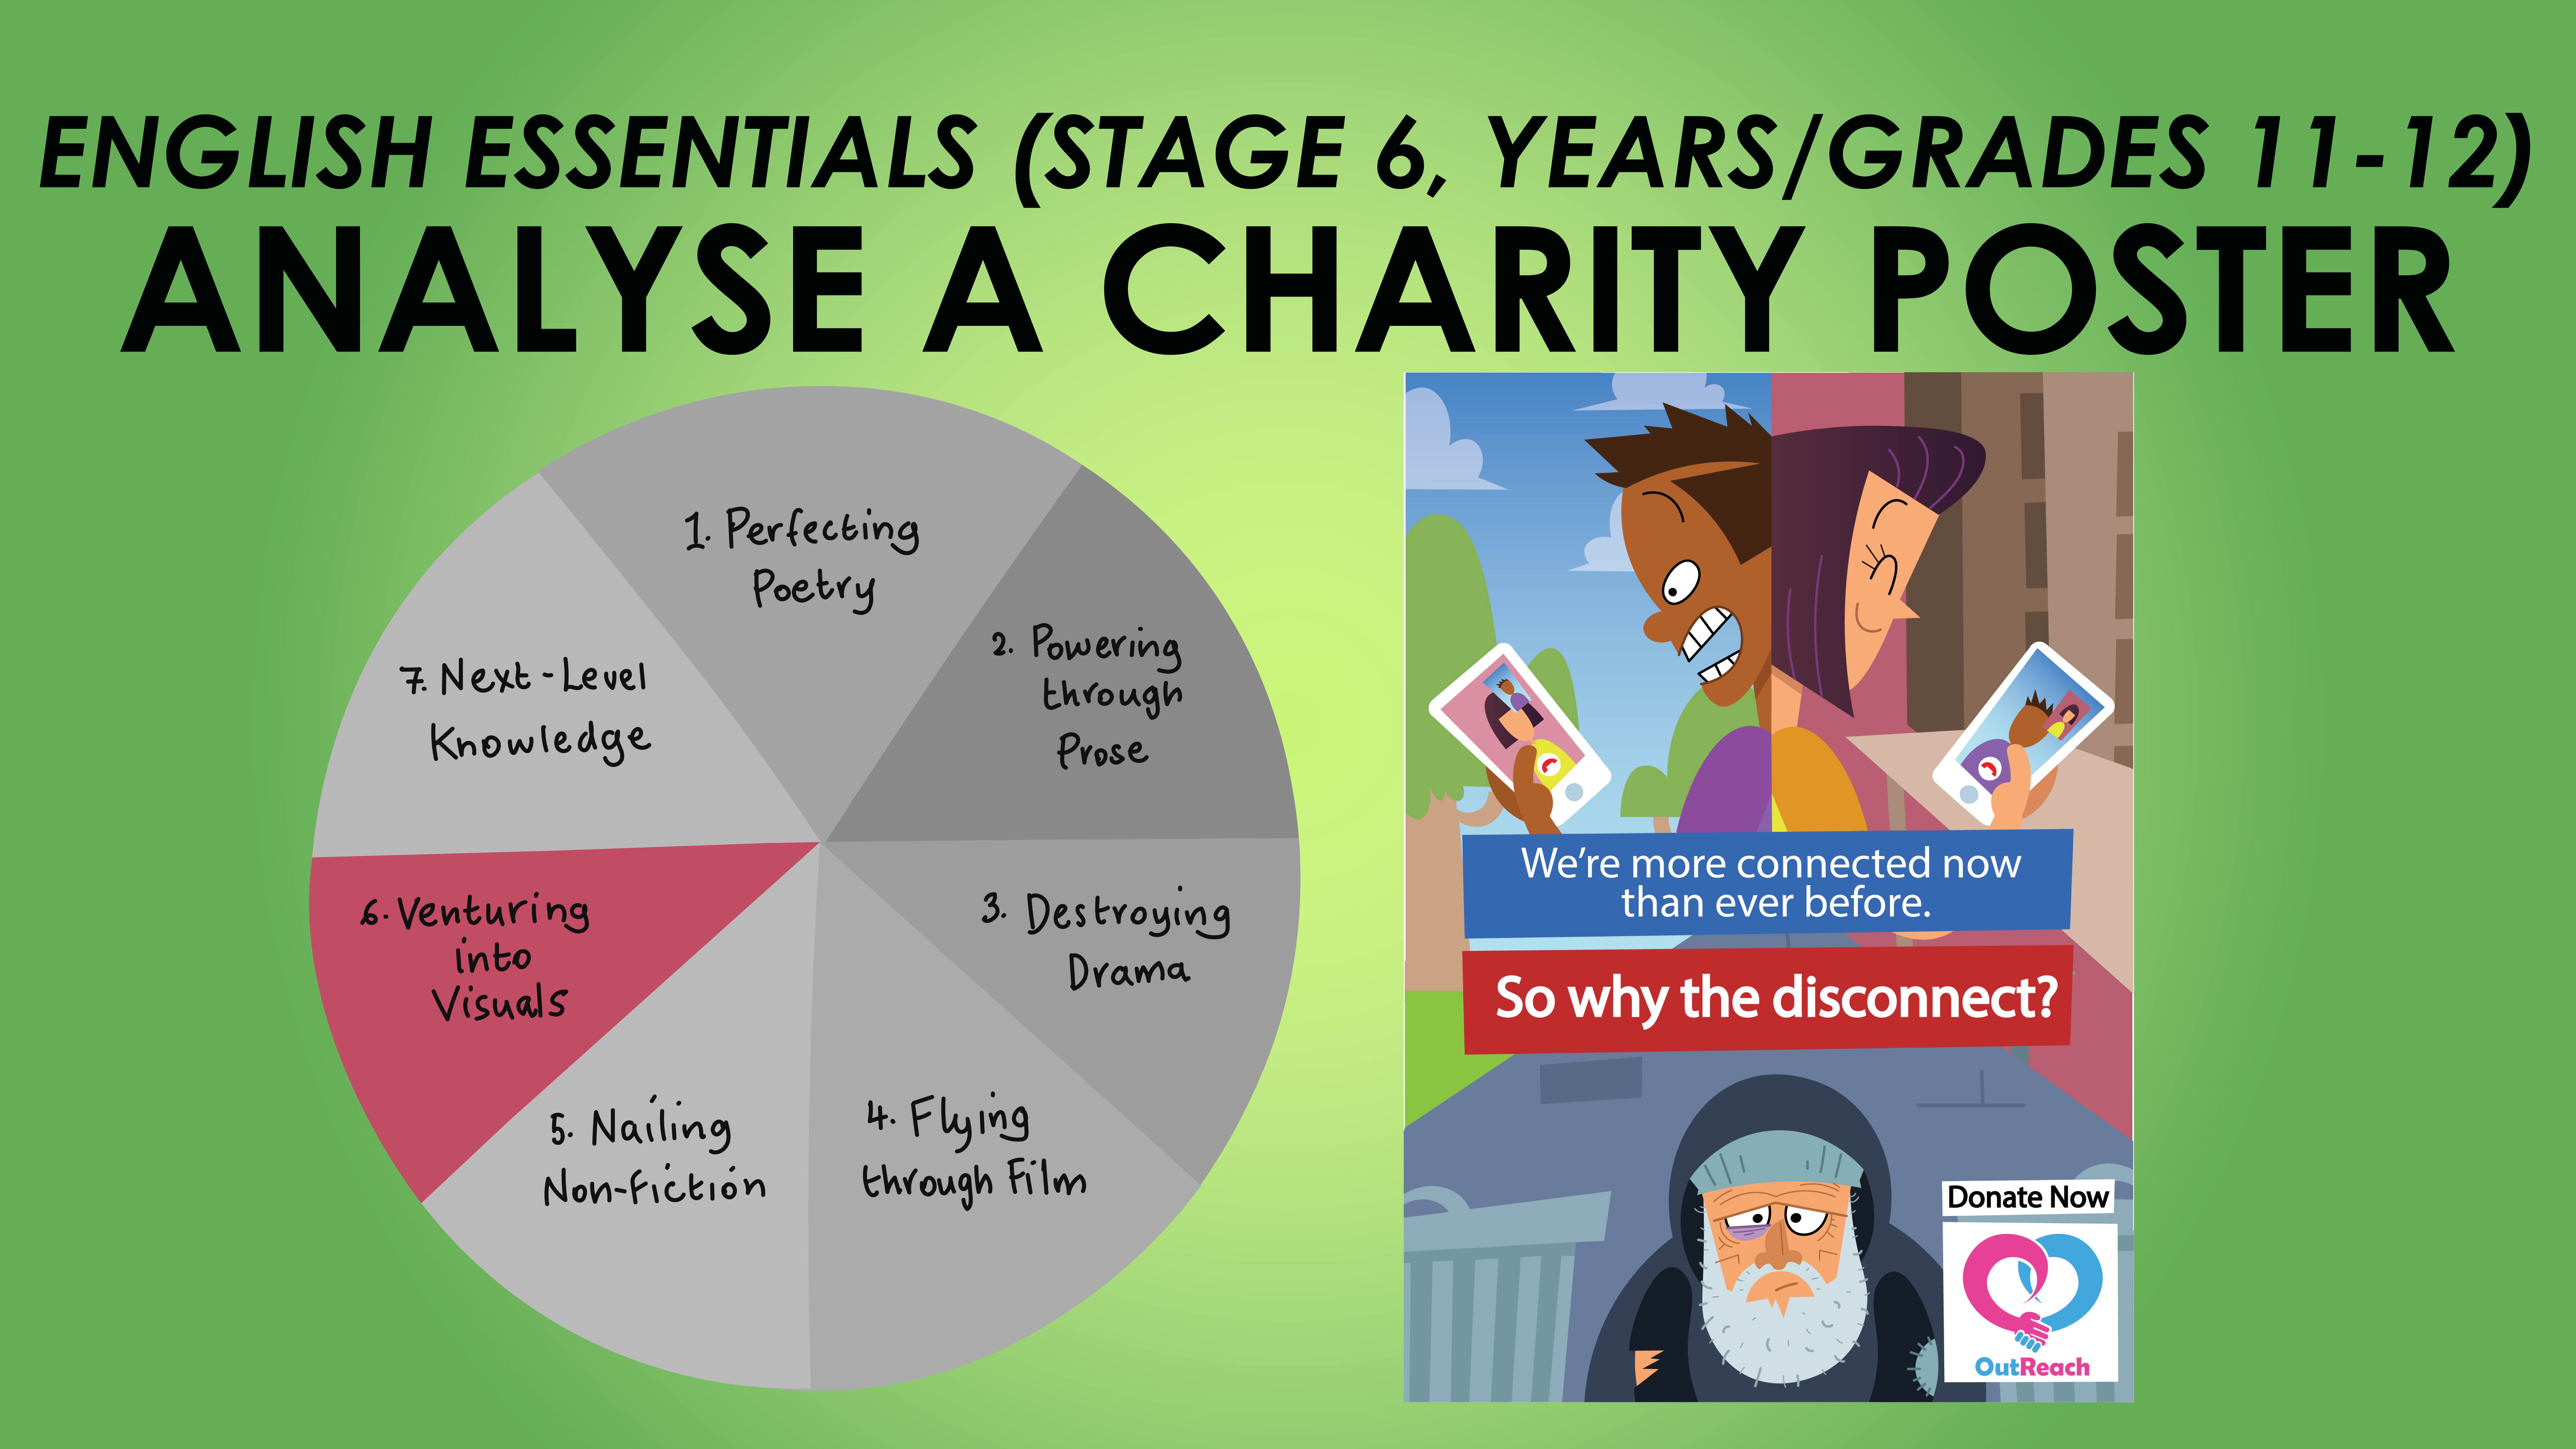 English Essentials - Venturing into Visuals - Analyse a Charity Poster (Stage 6, Years/Grades 11-12)